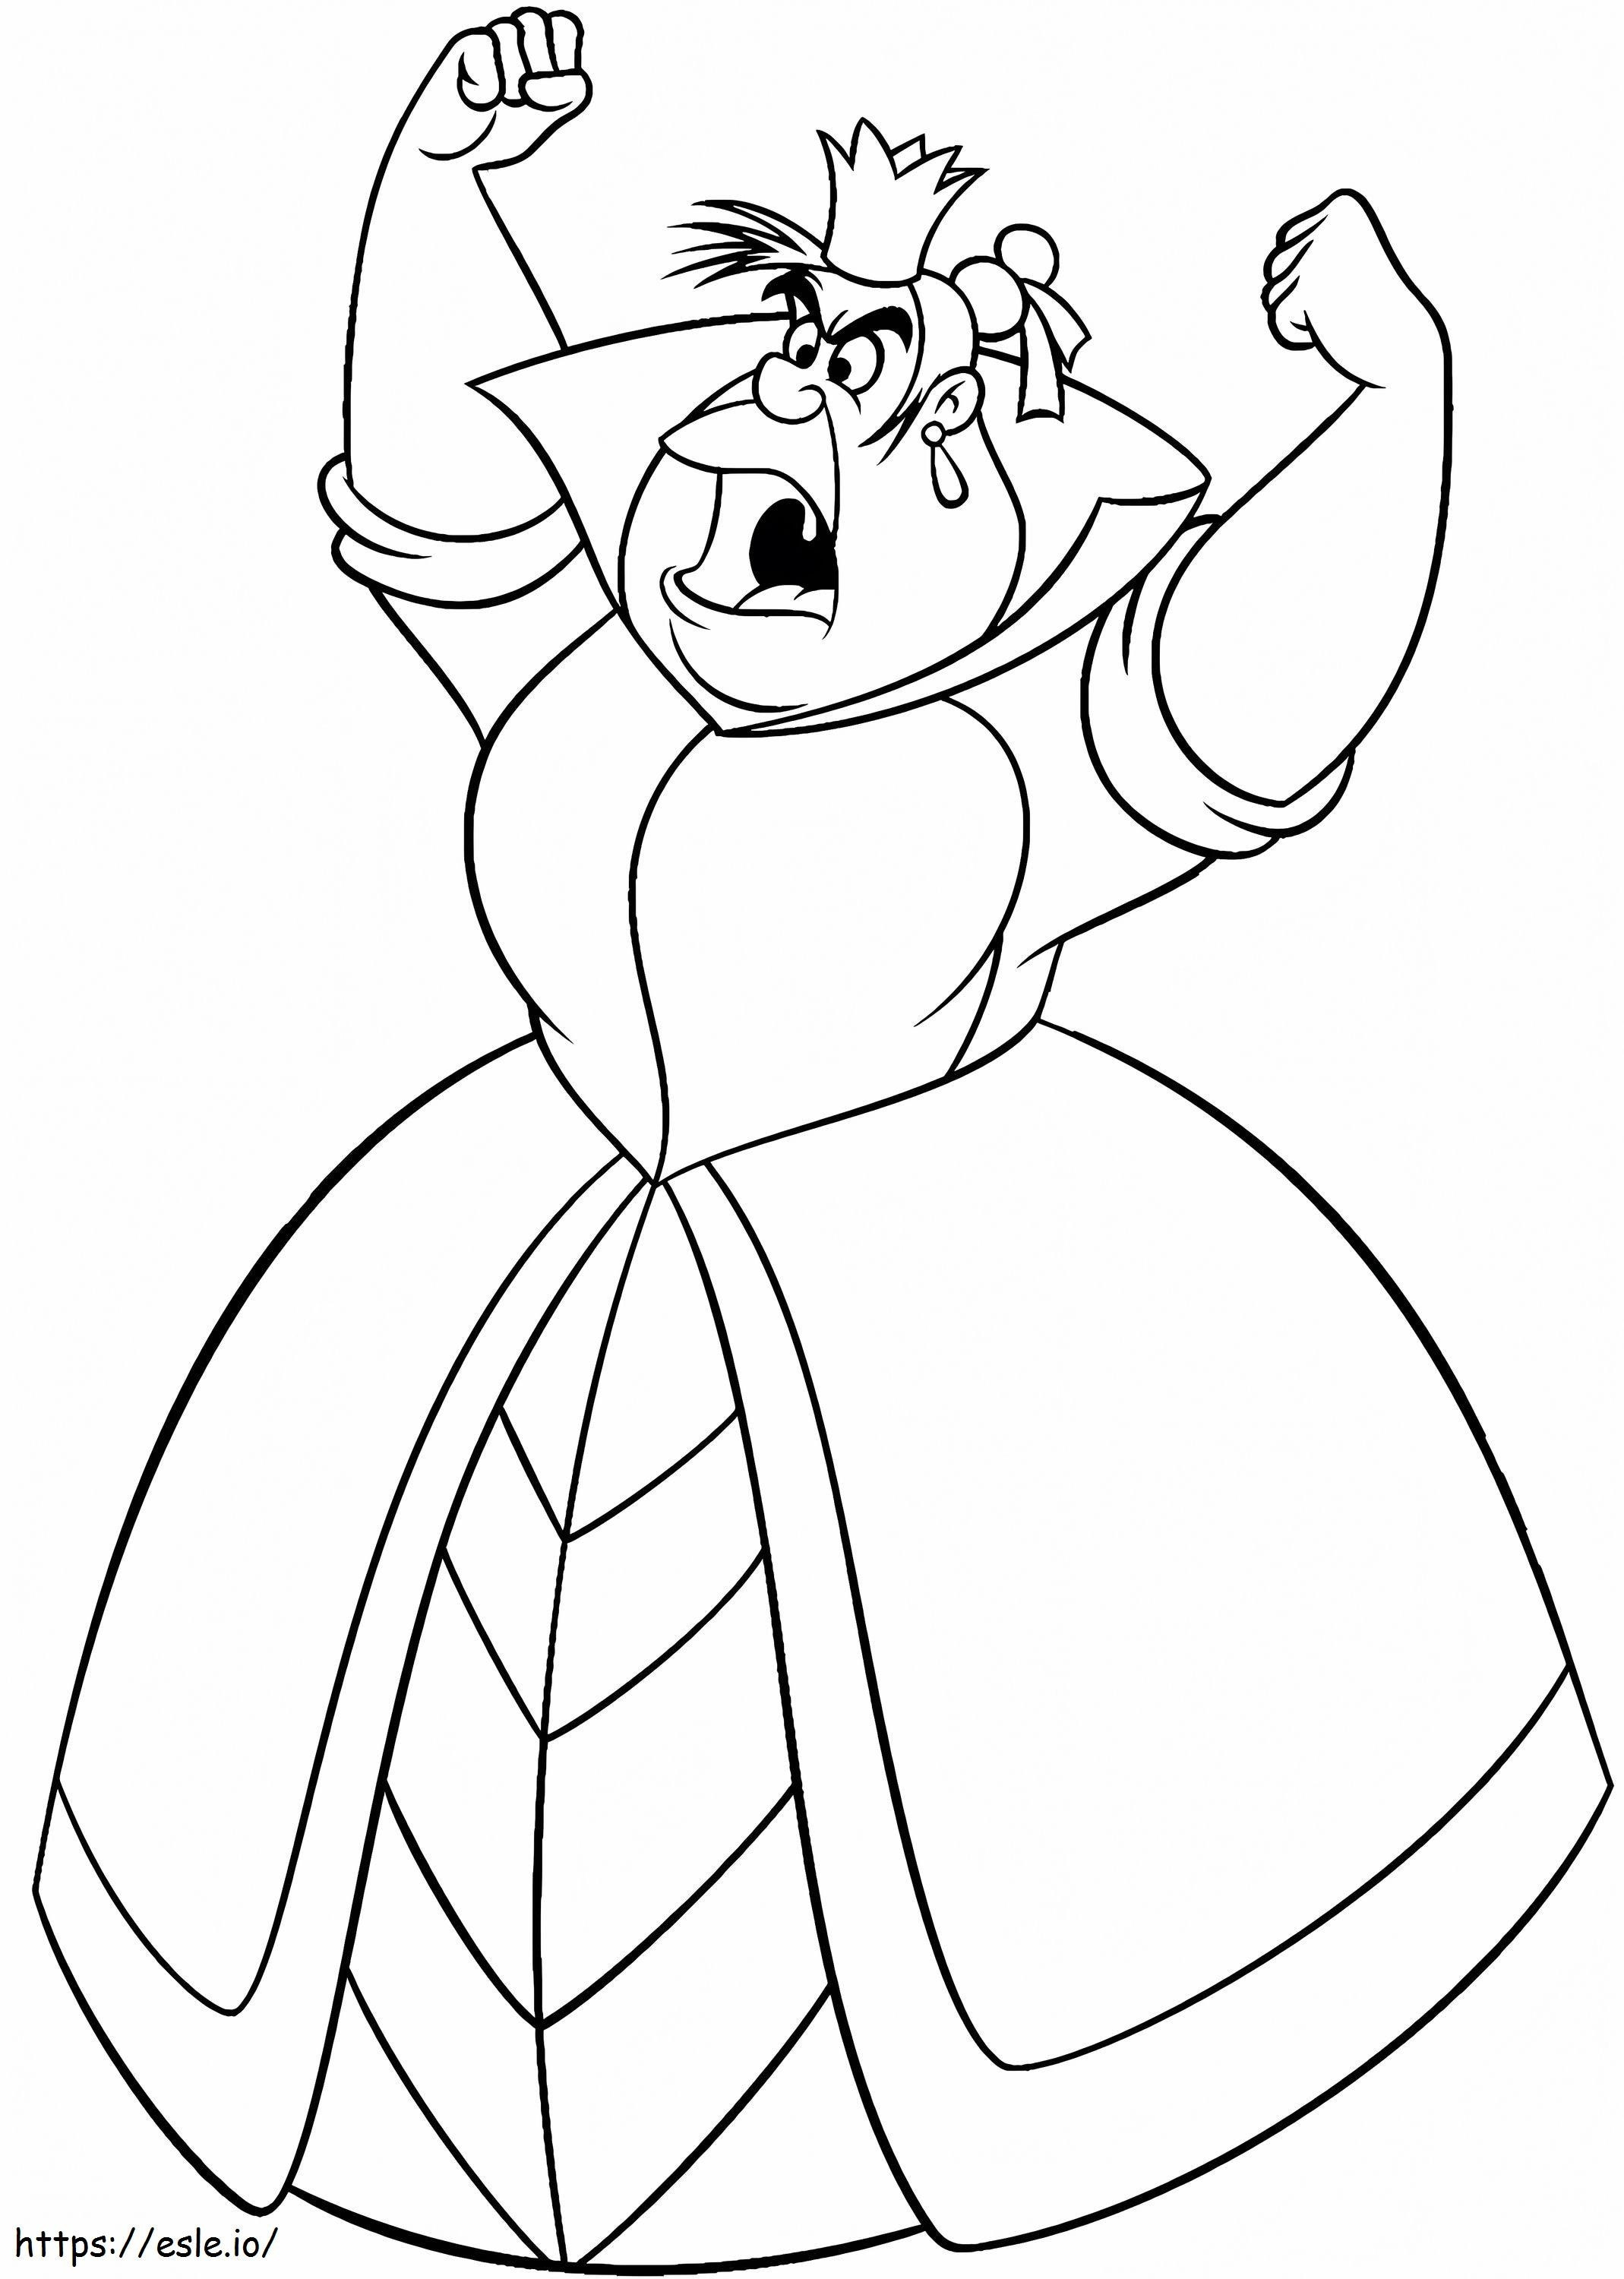 Draw Alice In Wonderland Characters Disney Home coloring page